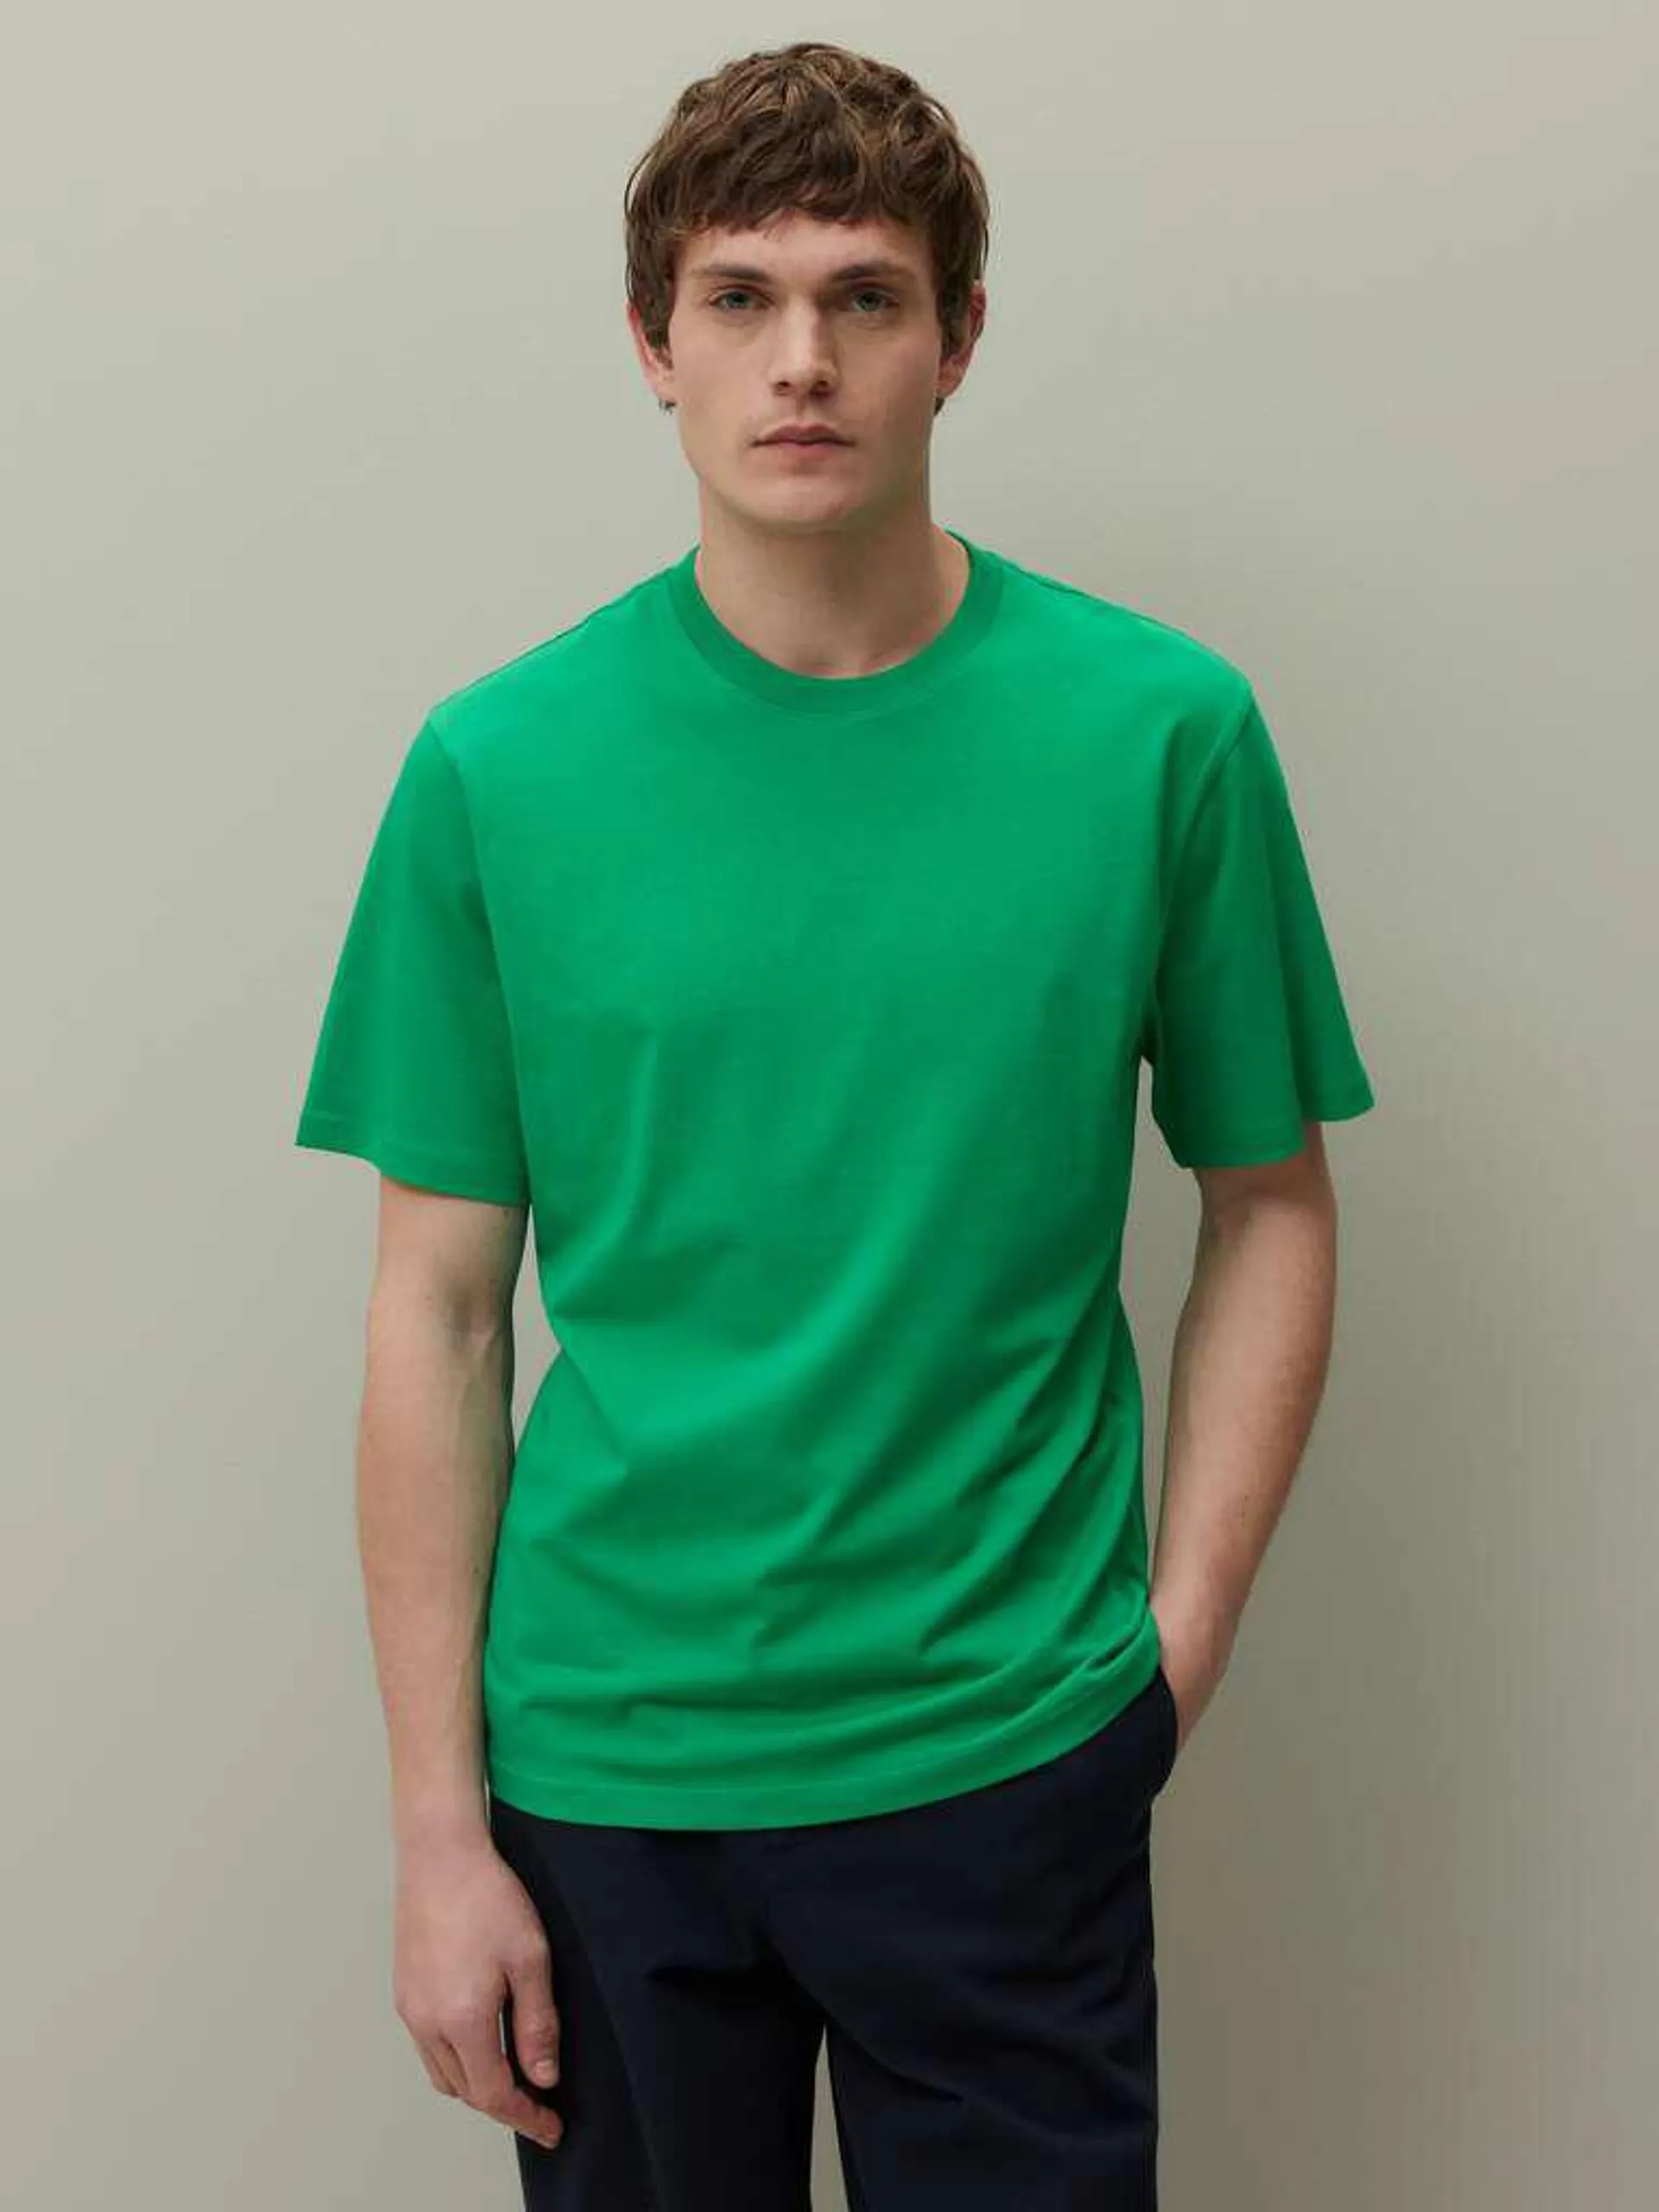 Emerald Green Supima cotton T-shirt with round neck